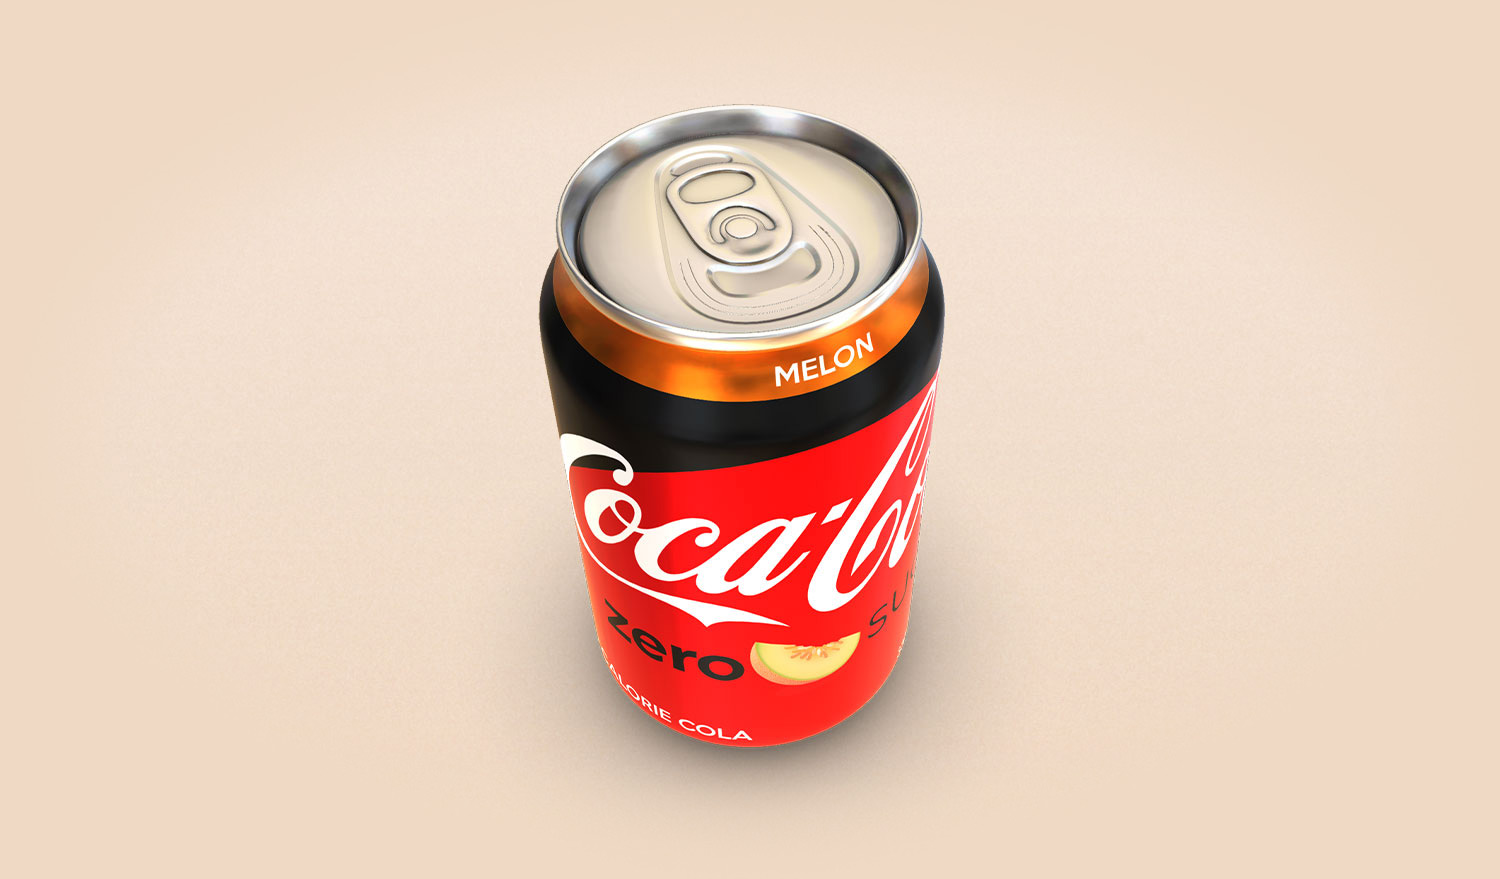 3D augmented reality coke can used in market research